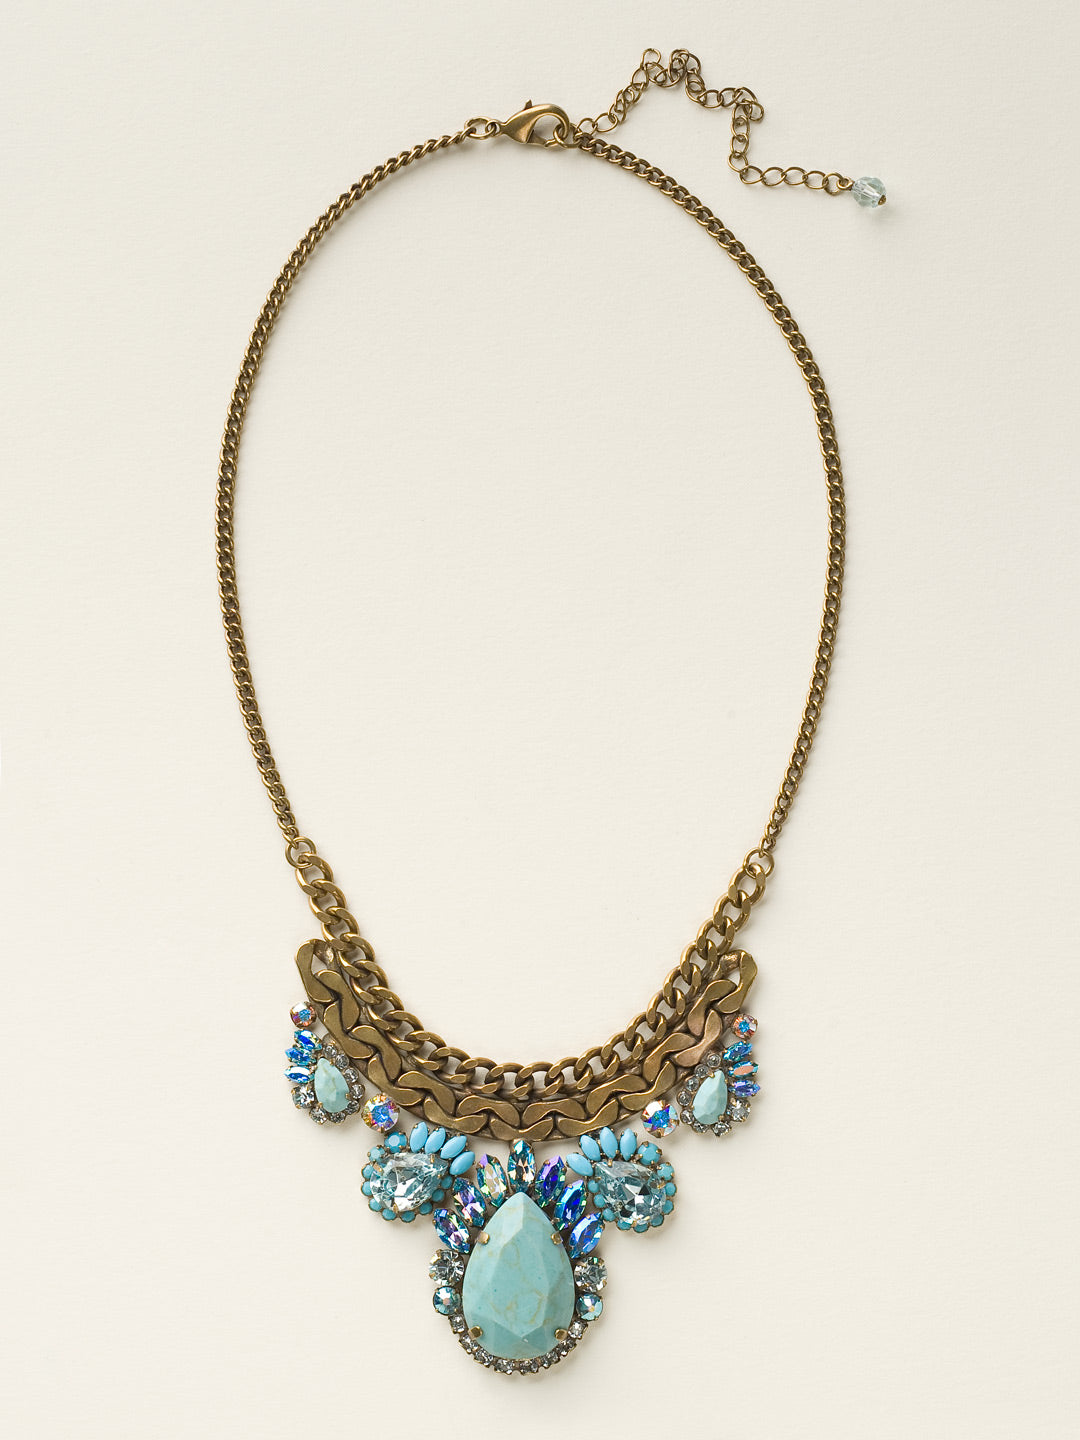 Graduated Pear Statement Necklace - NCU17AGAZ - Metal and sparkle have never looked so good! Five variously sized teardrop stones accented with feathered marquis crystals hang from a thick curb chain. From Sorrelli's Azure Allure collection in our Antique Gold-tone finish.